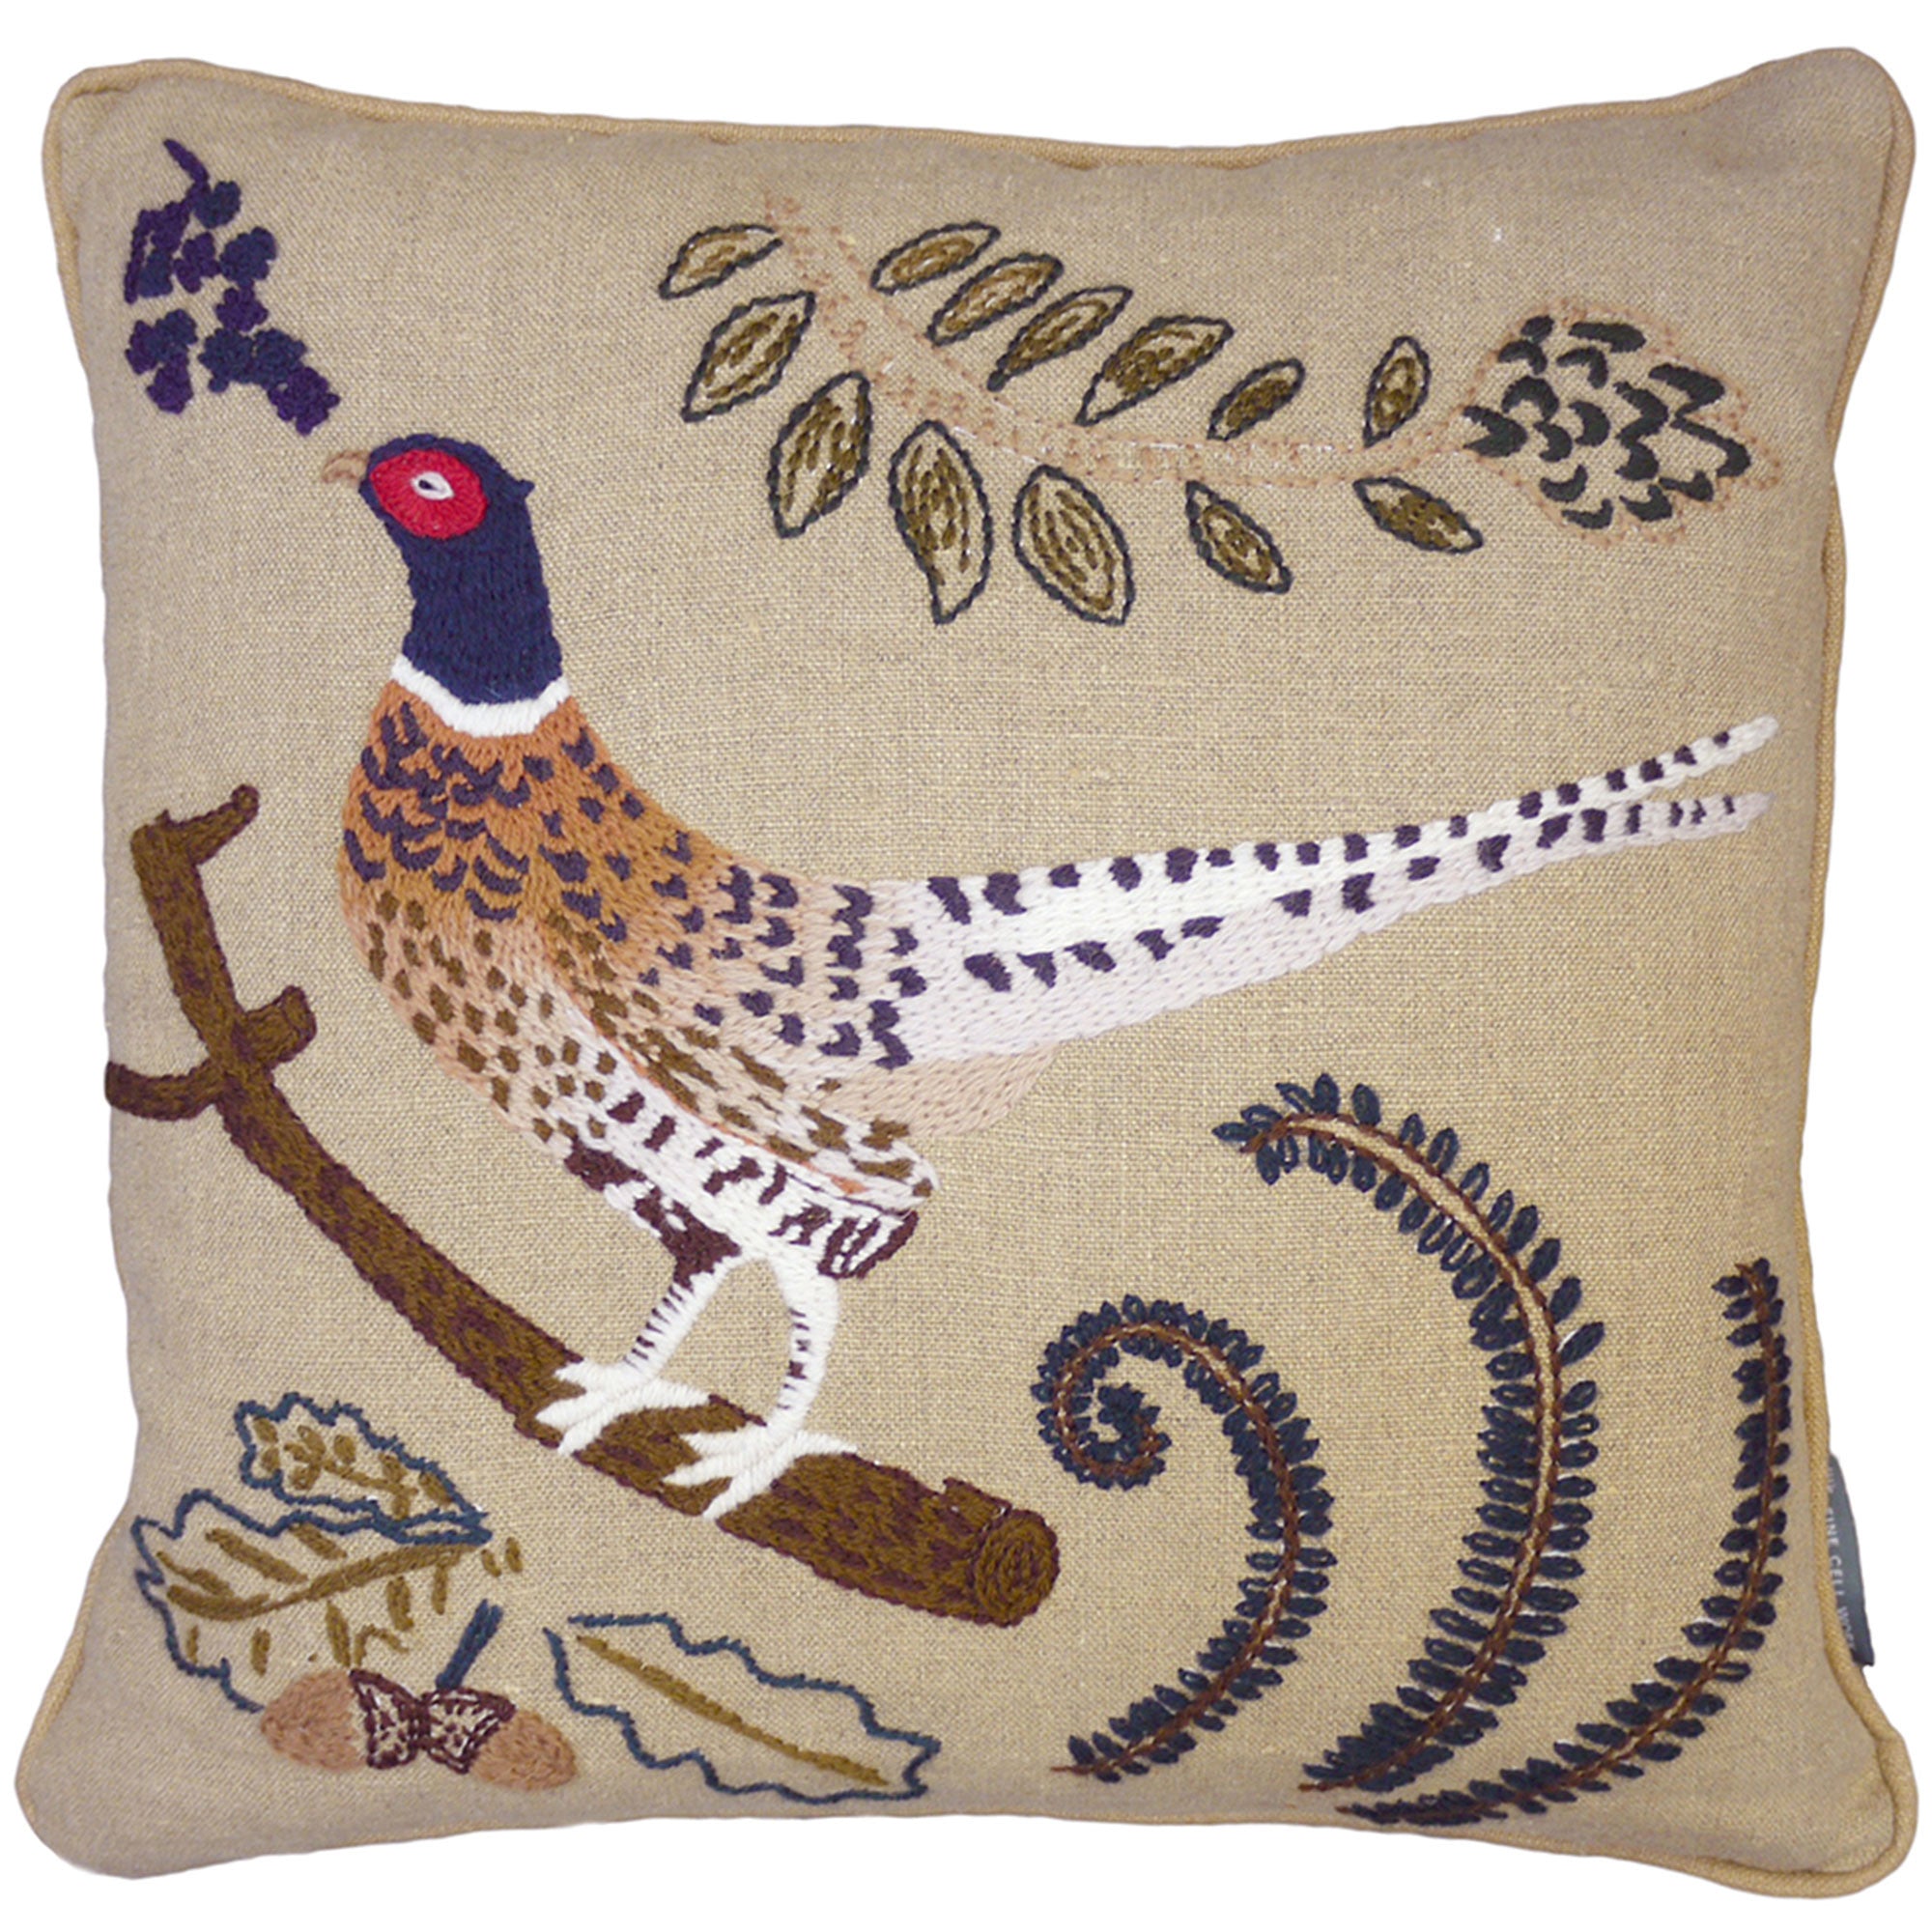 Embroidered Pheasant Cushion Made To Order